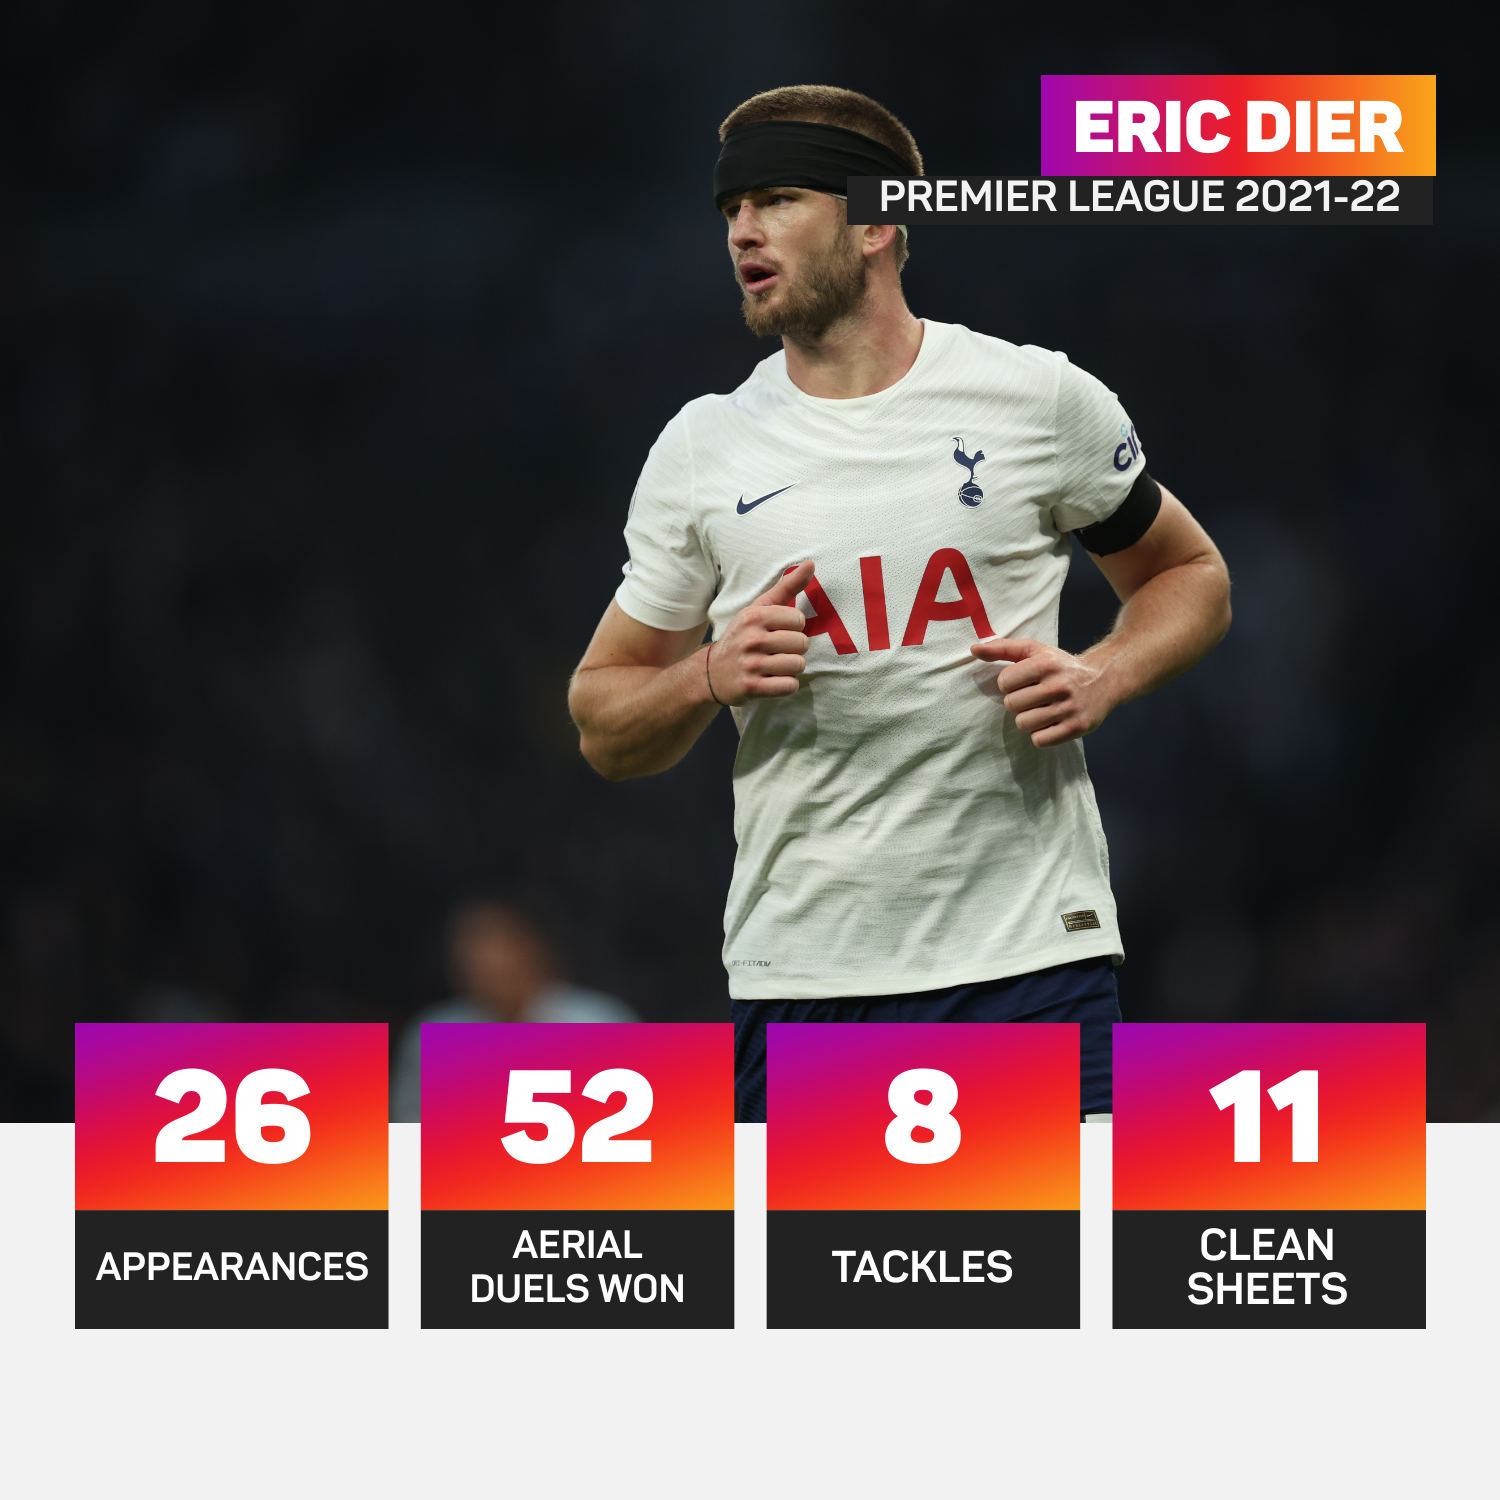 Eric Dier has been solid for Spurs this season